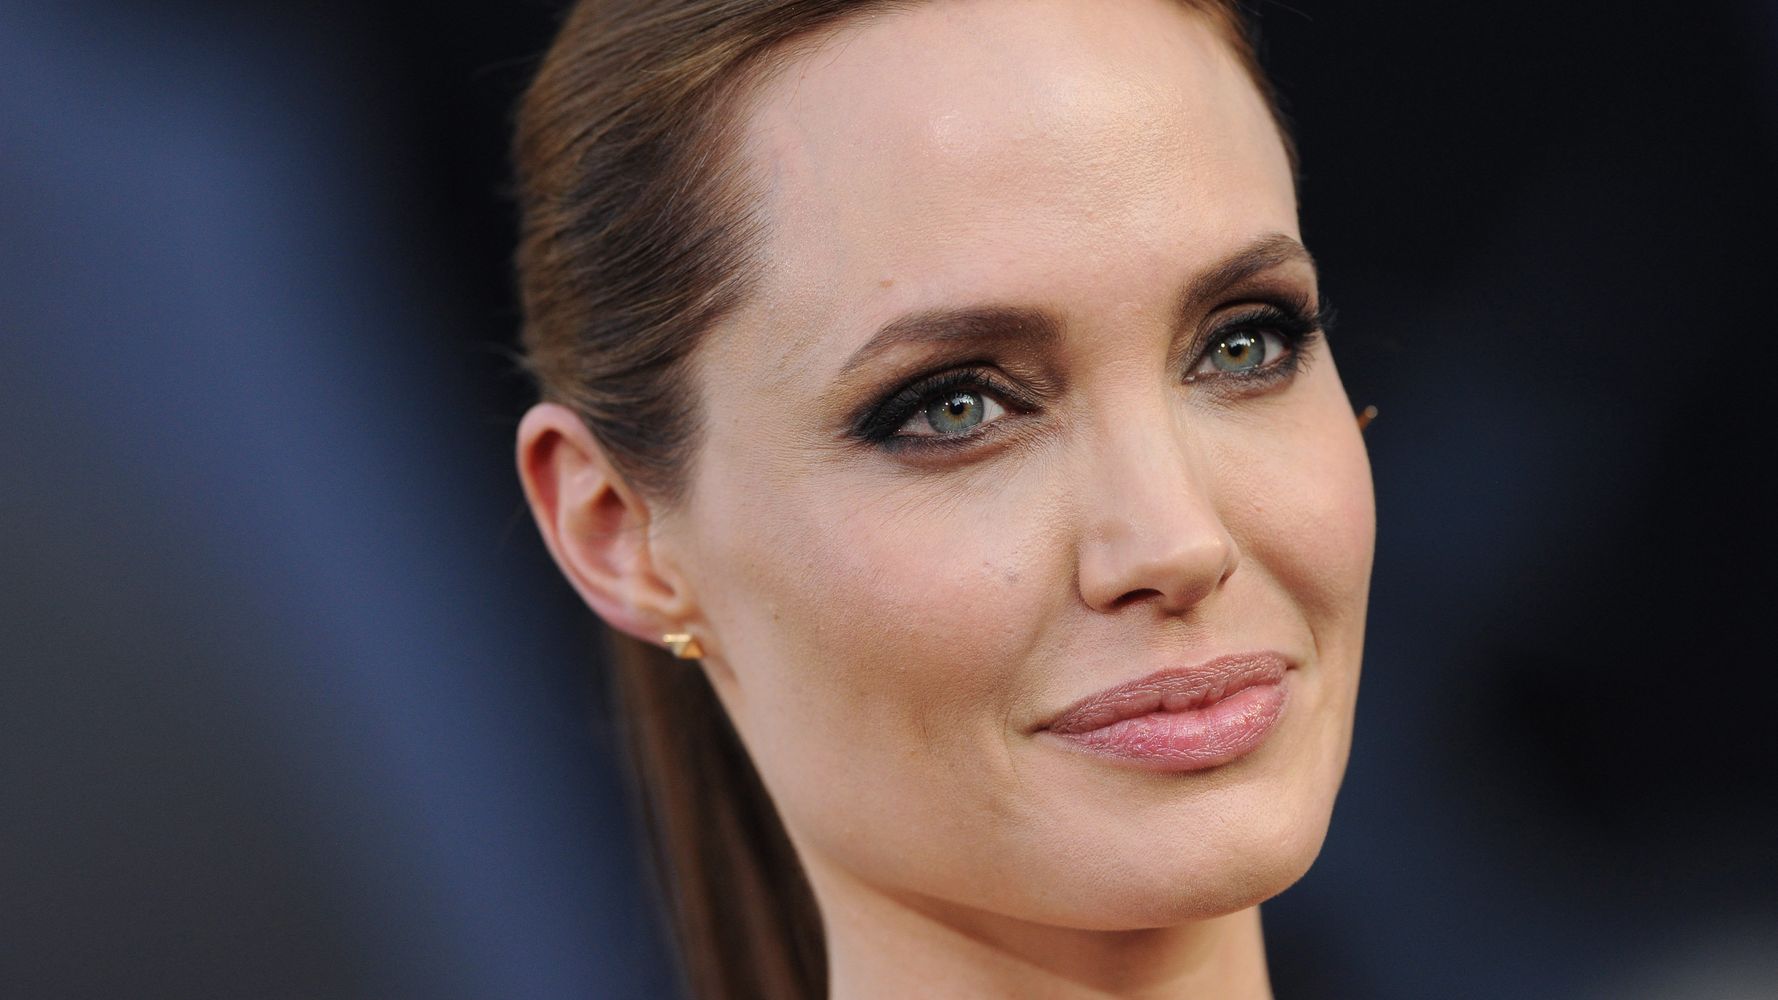 Porn Sex Angelina Jolie - Angelina Jolie Proves Moms Can Also Be Sexual Women | HuffPost Life